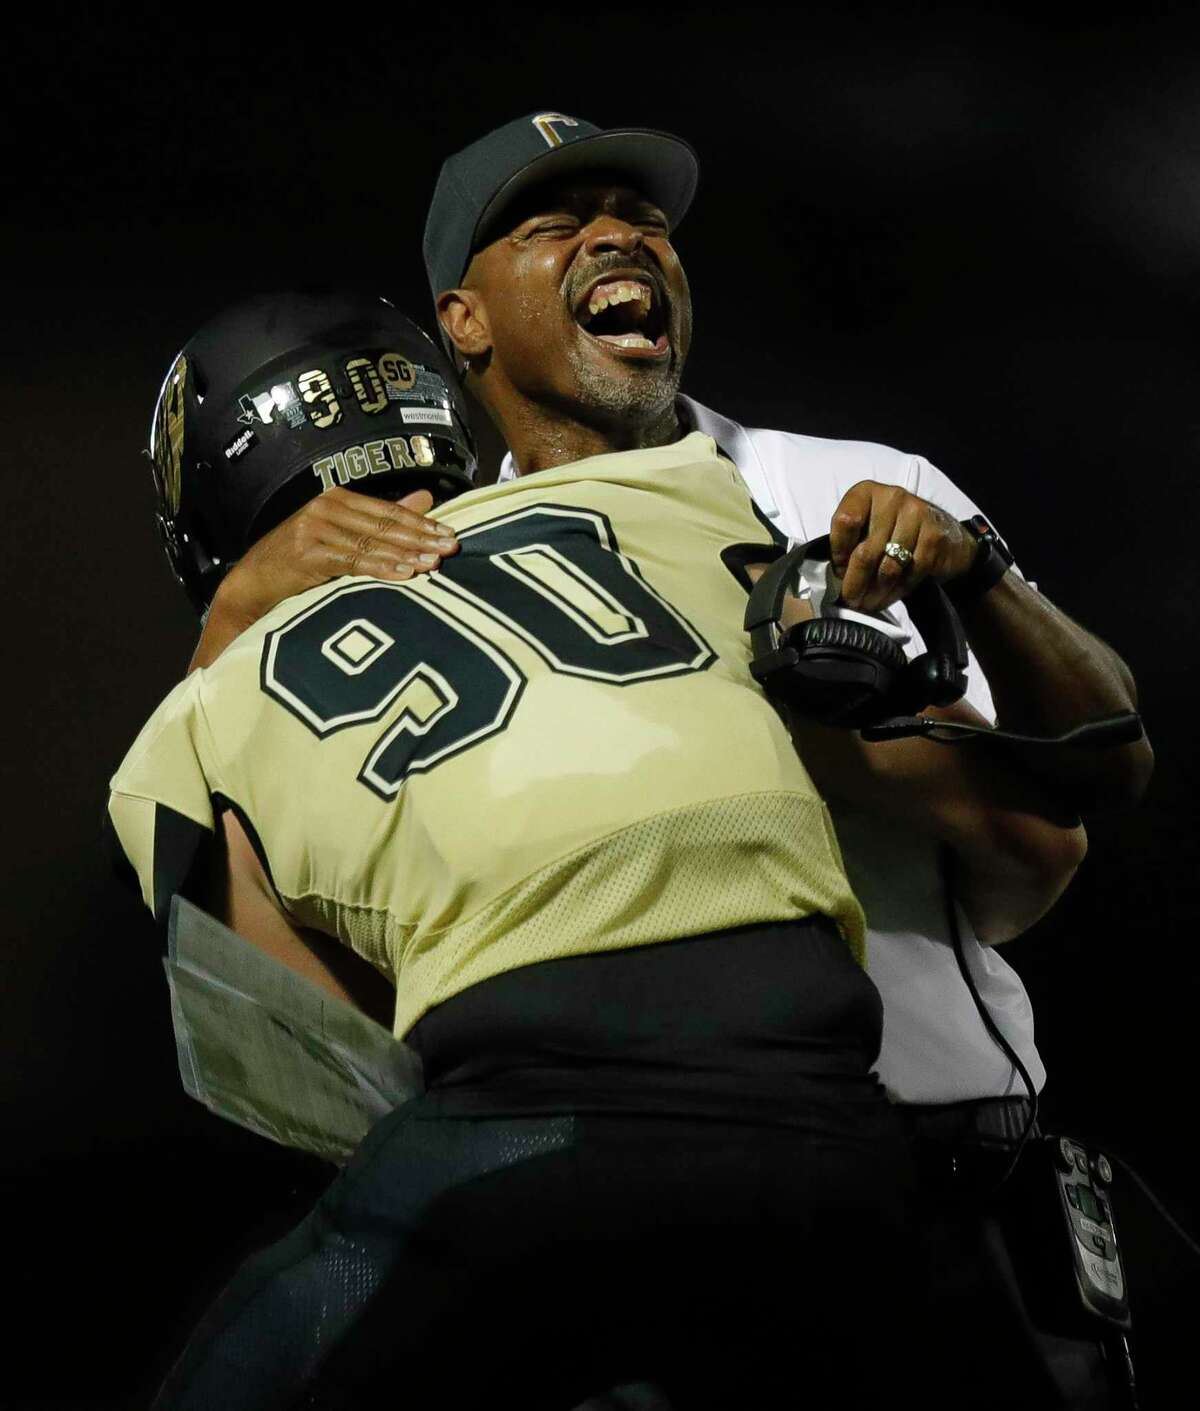 Conroe head coach Cedric Hardeman embraces defensive lineman Matthew Westmoreland (90) after he returned an interception for a 45-yard touchdown during the third quarter of a non-district high school football game at Buddy Moorhead Stadium, Friday, Aug. 27, 2021, in Conroe.